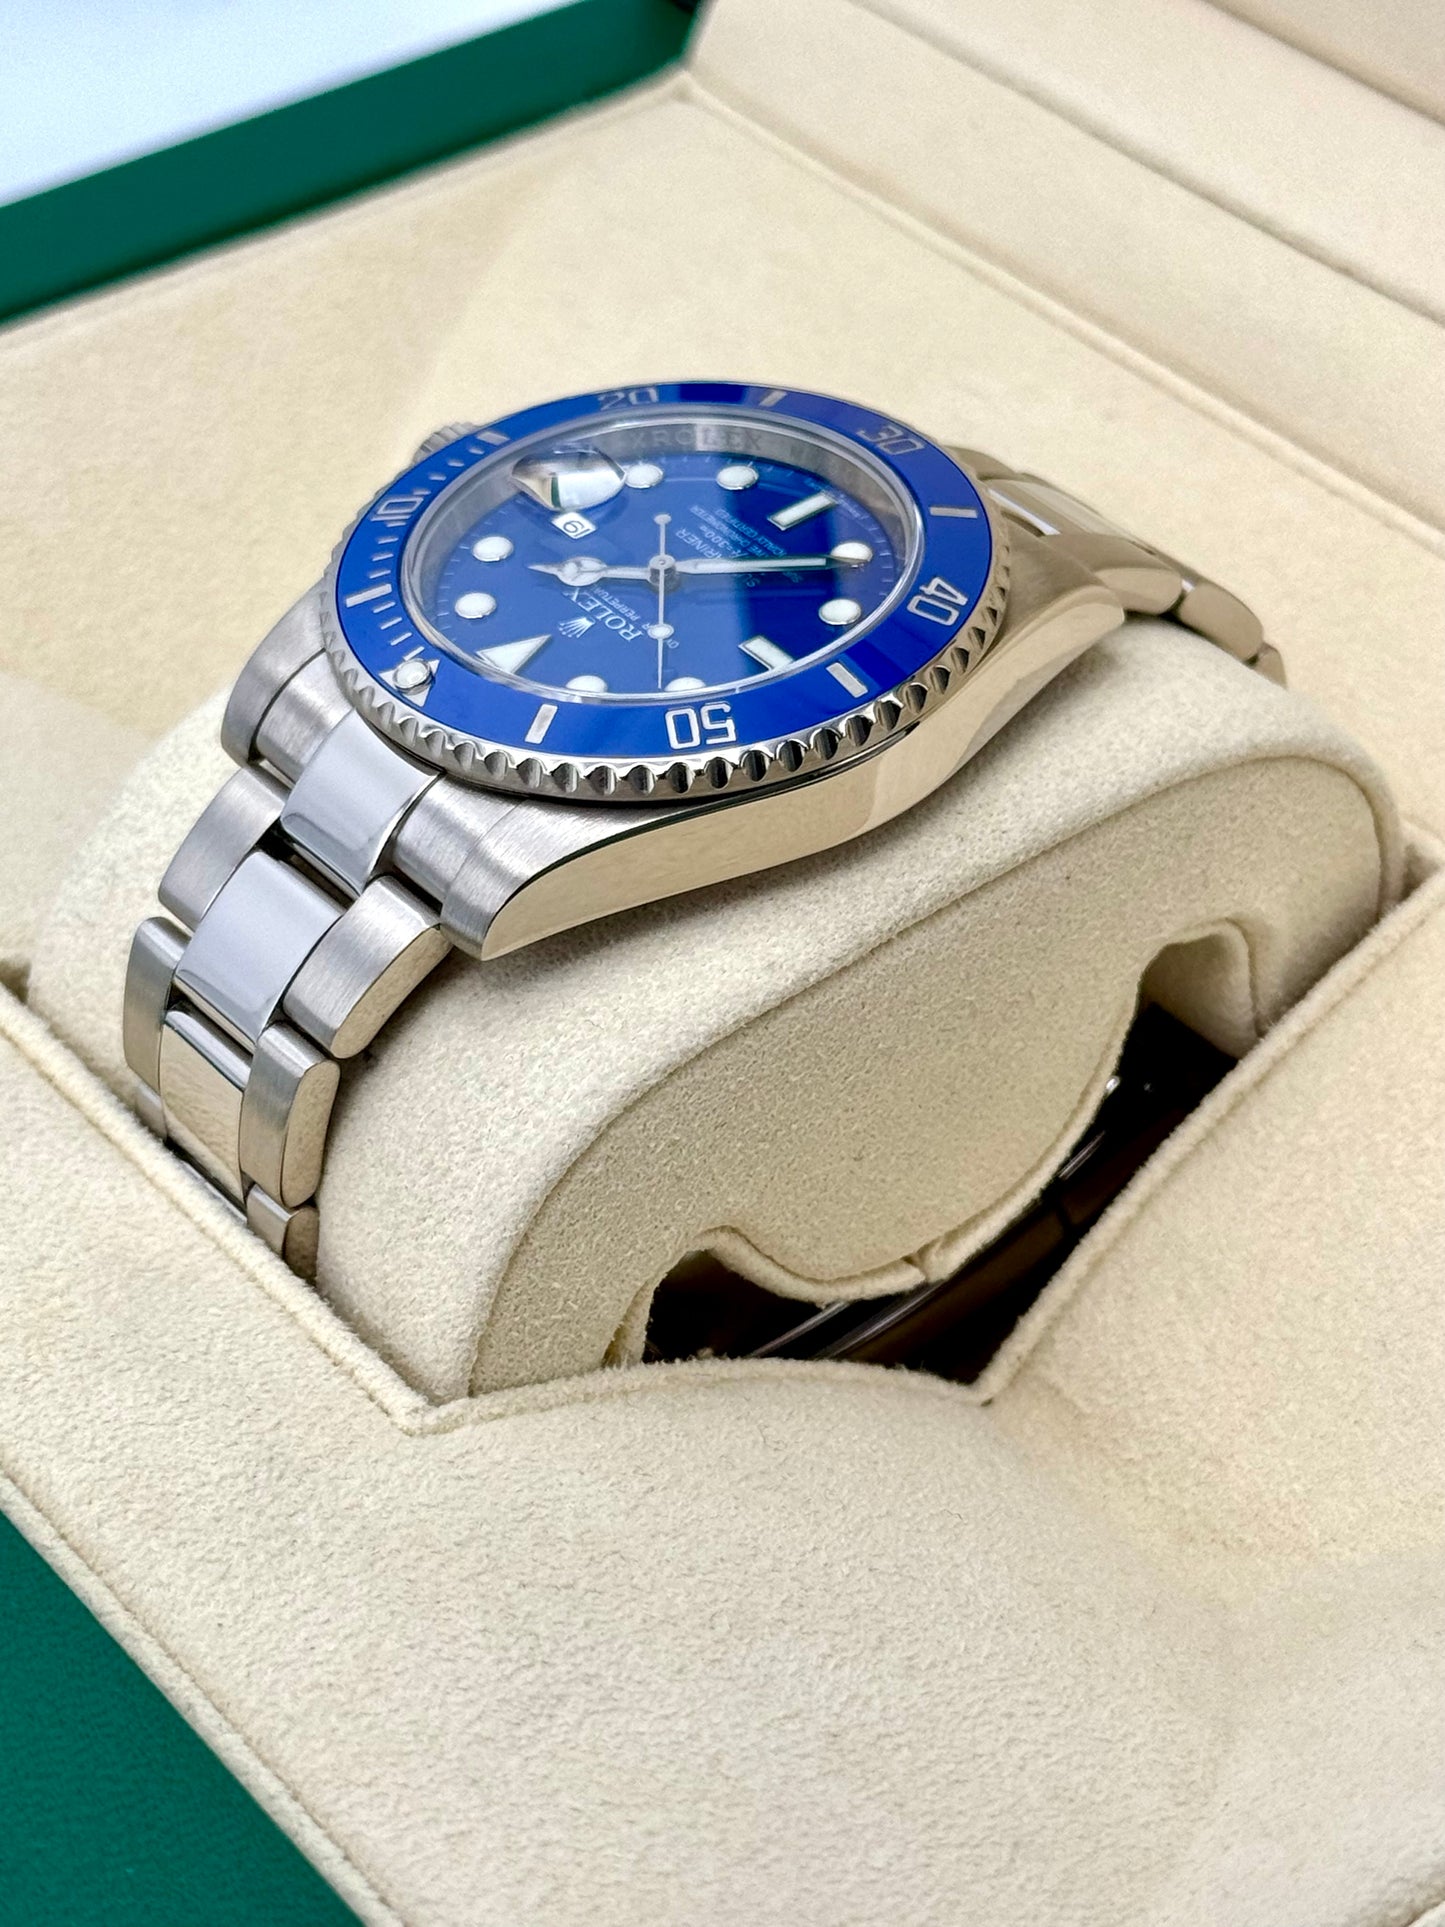 Rolex Submariner "Smurf" 40mm 116619LB White Gold Blue Dial - MyWatchLLC